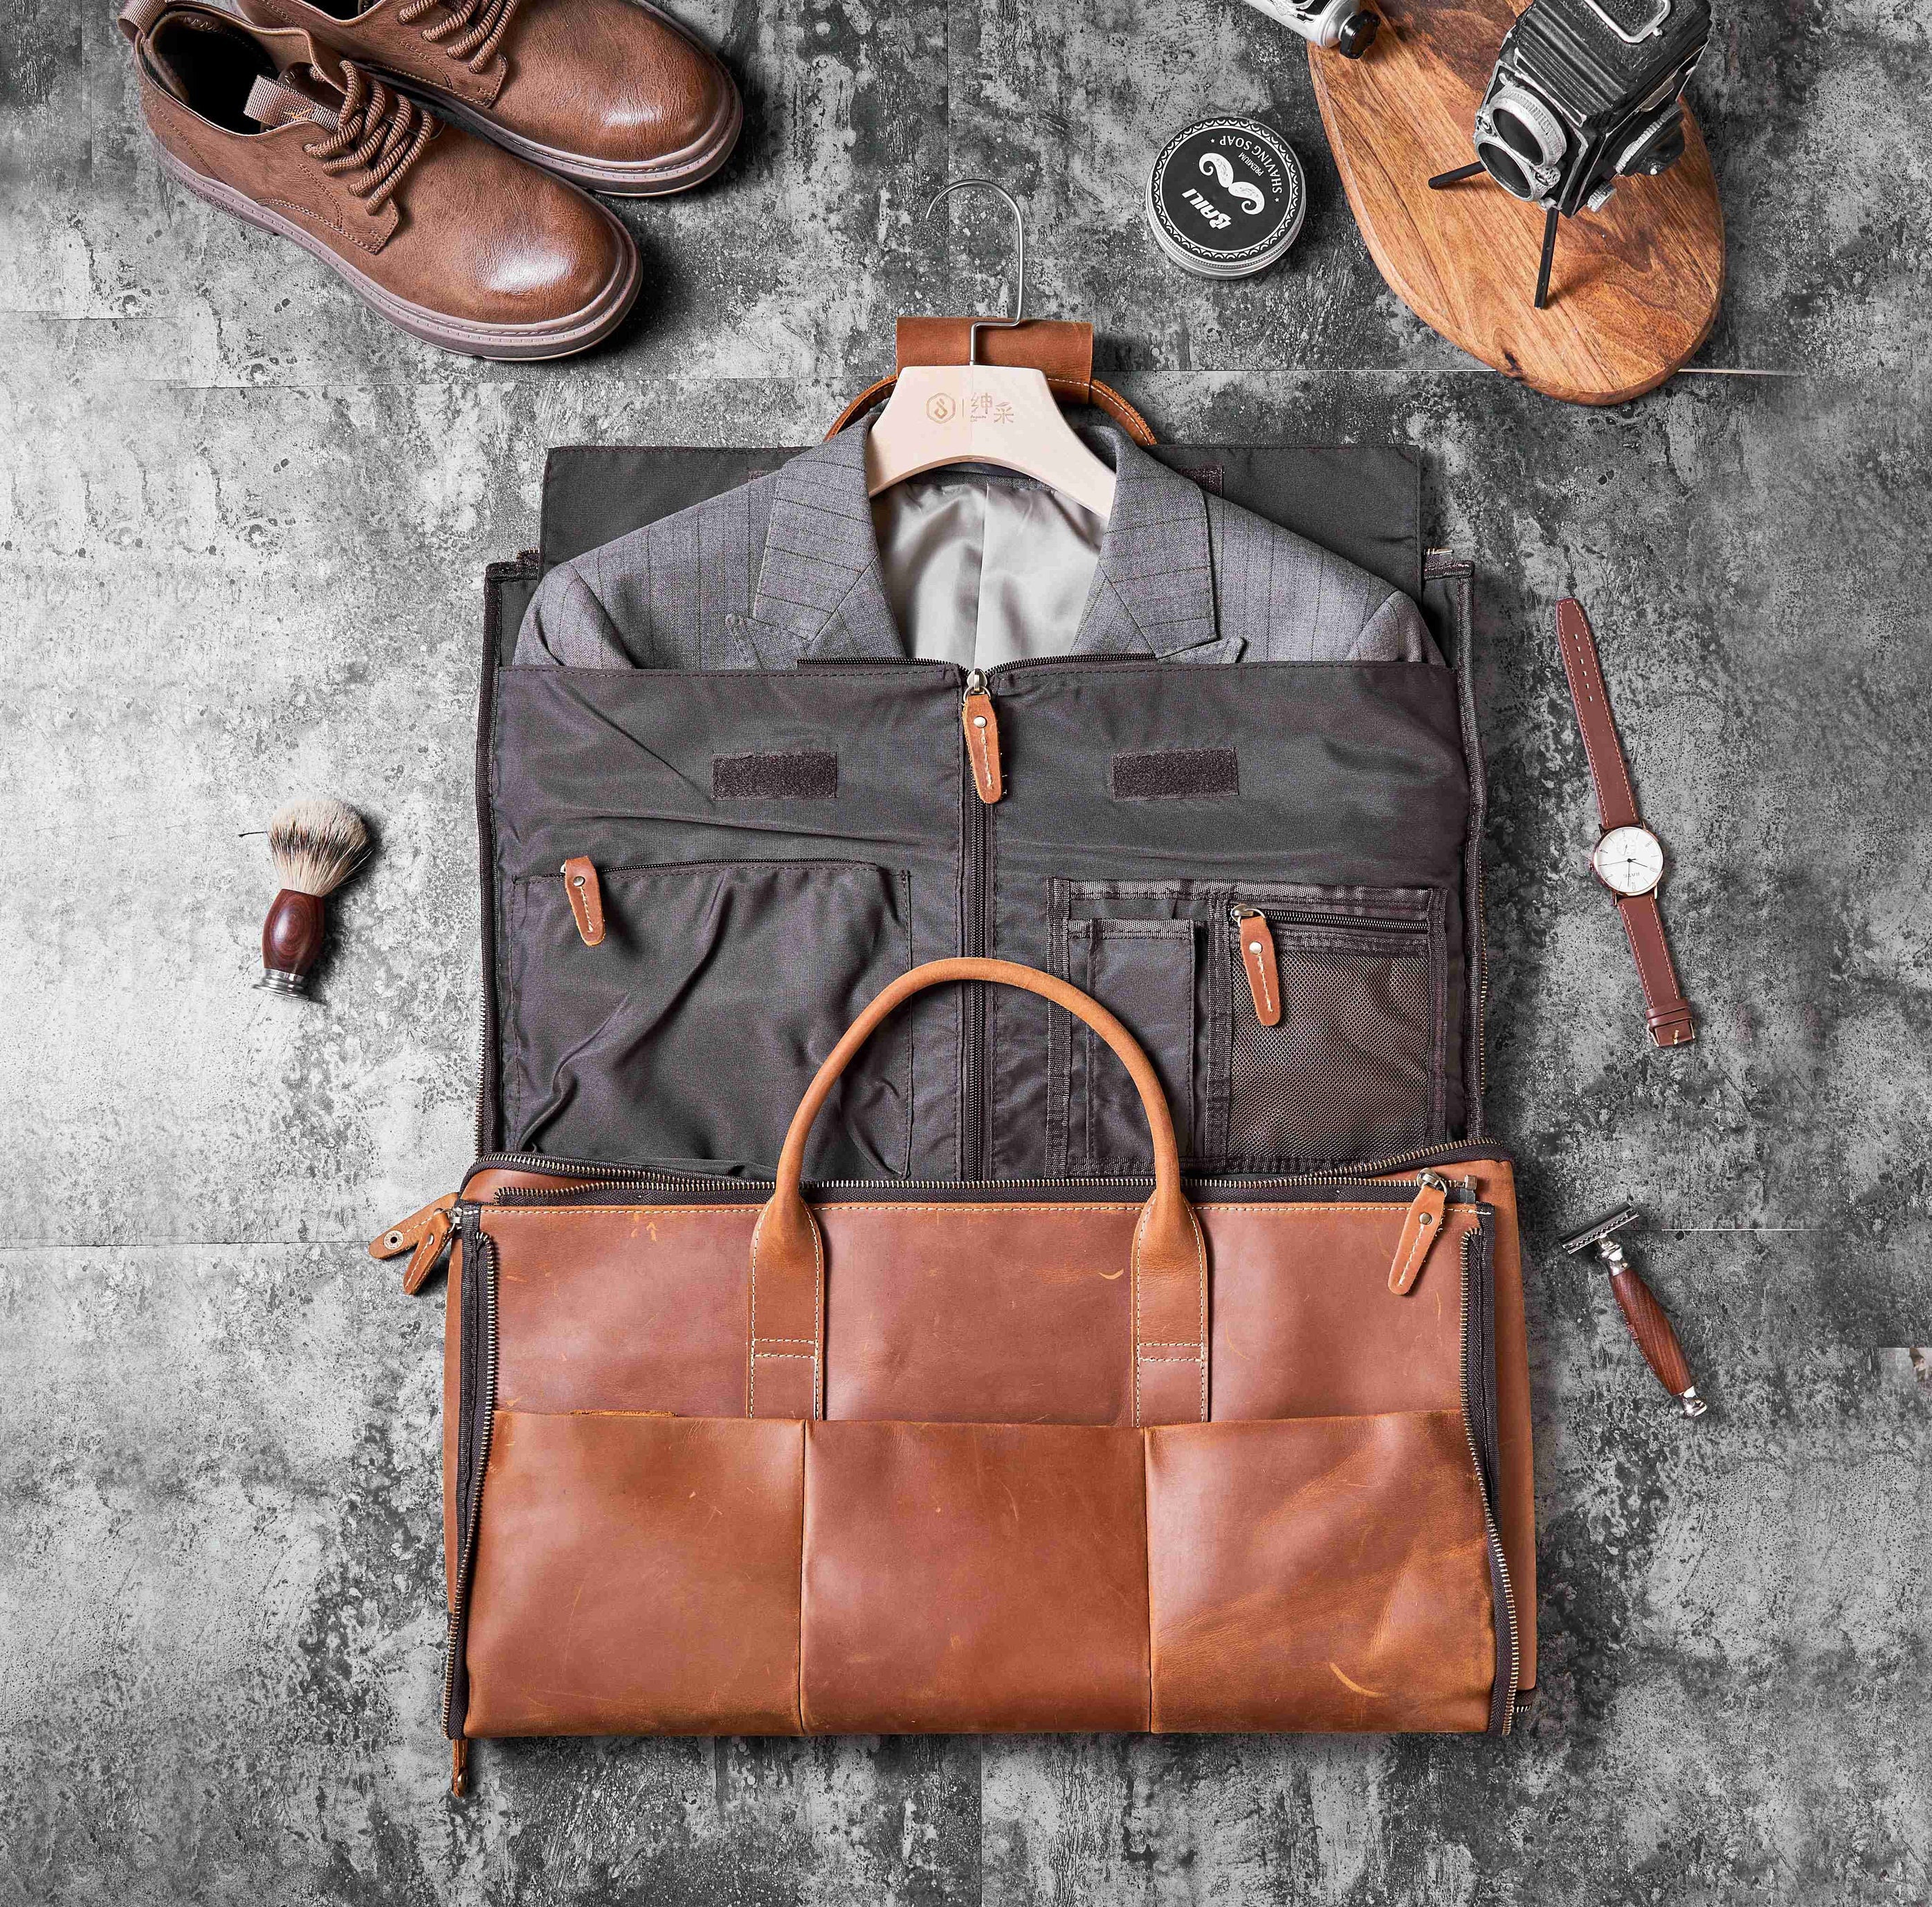 Leather Garment Duffel Weekend Travel Bag With Shoe Pouch, Personalized  Leather Duffle Flight Bag Hanging Clothes Bag, Groomsmen Gift Bag 